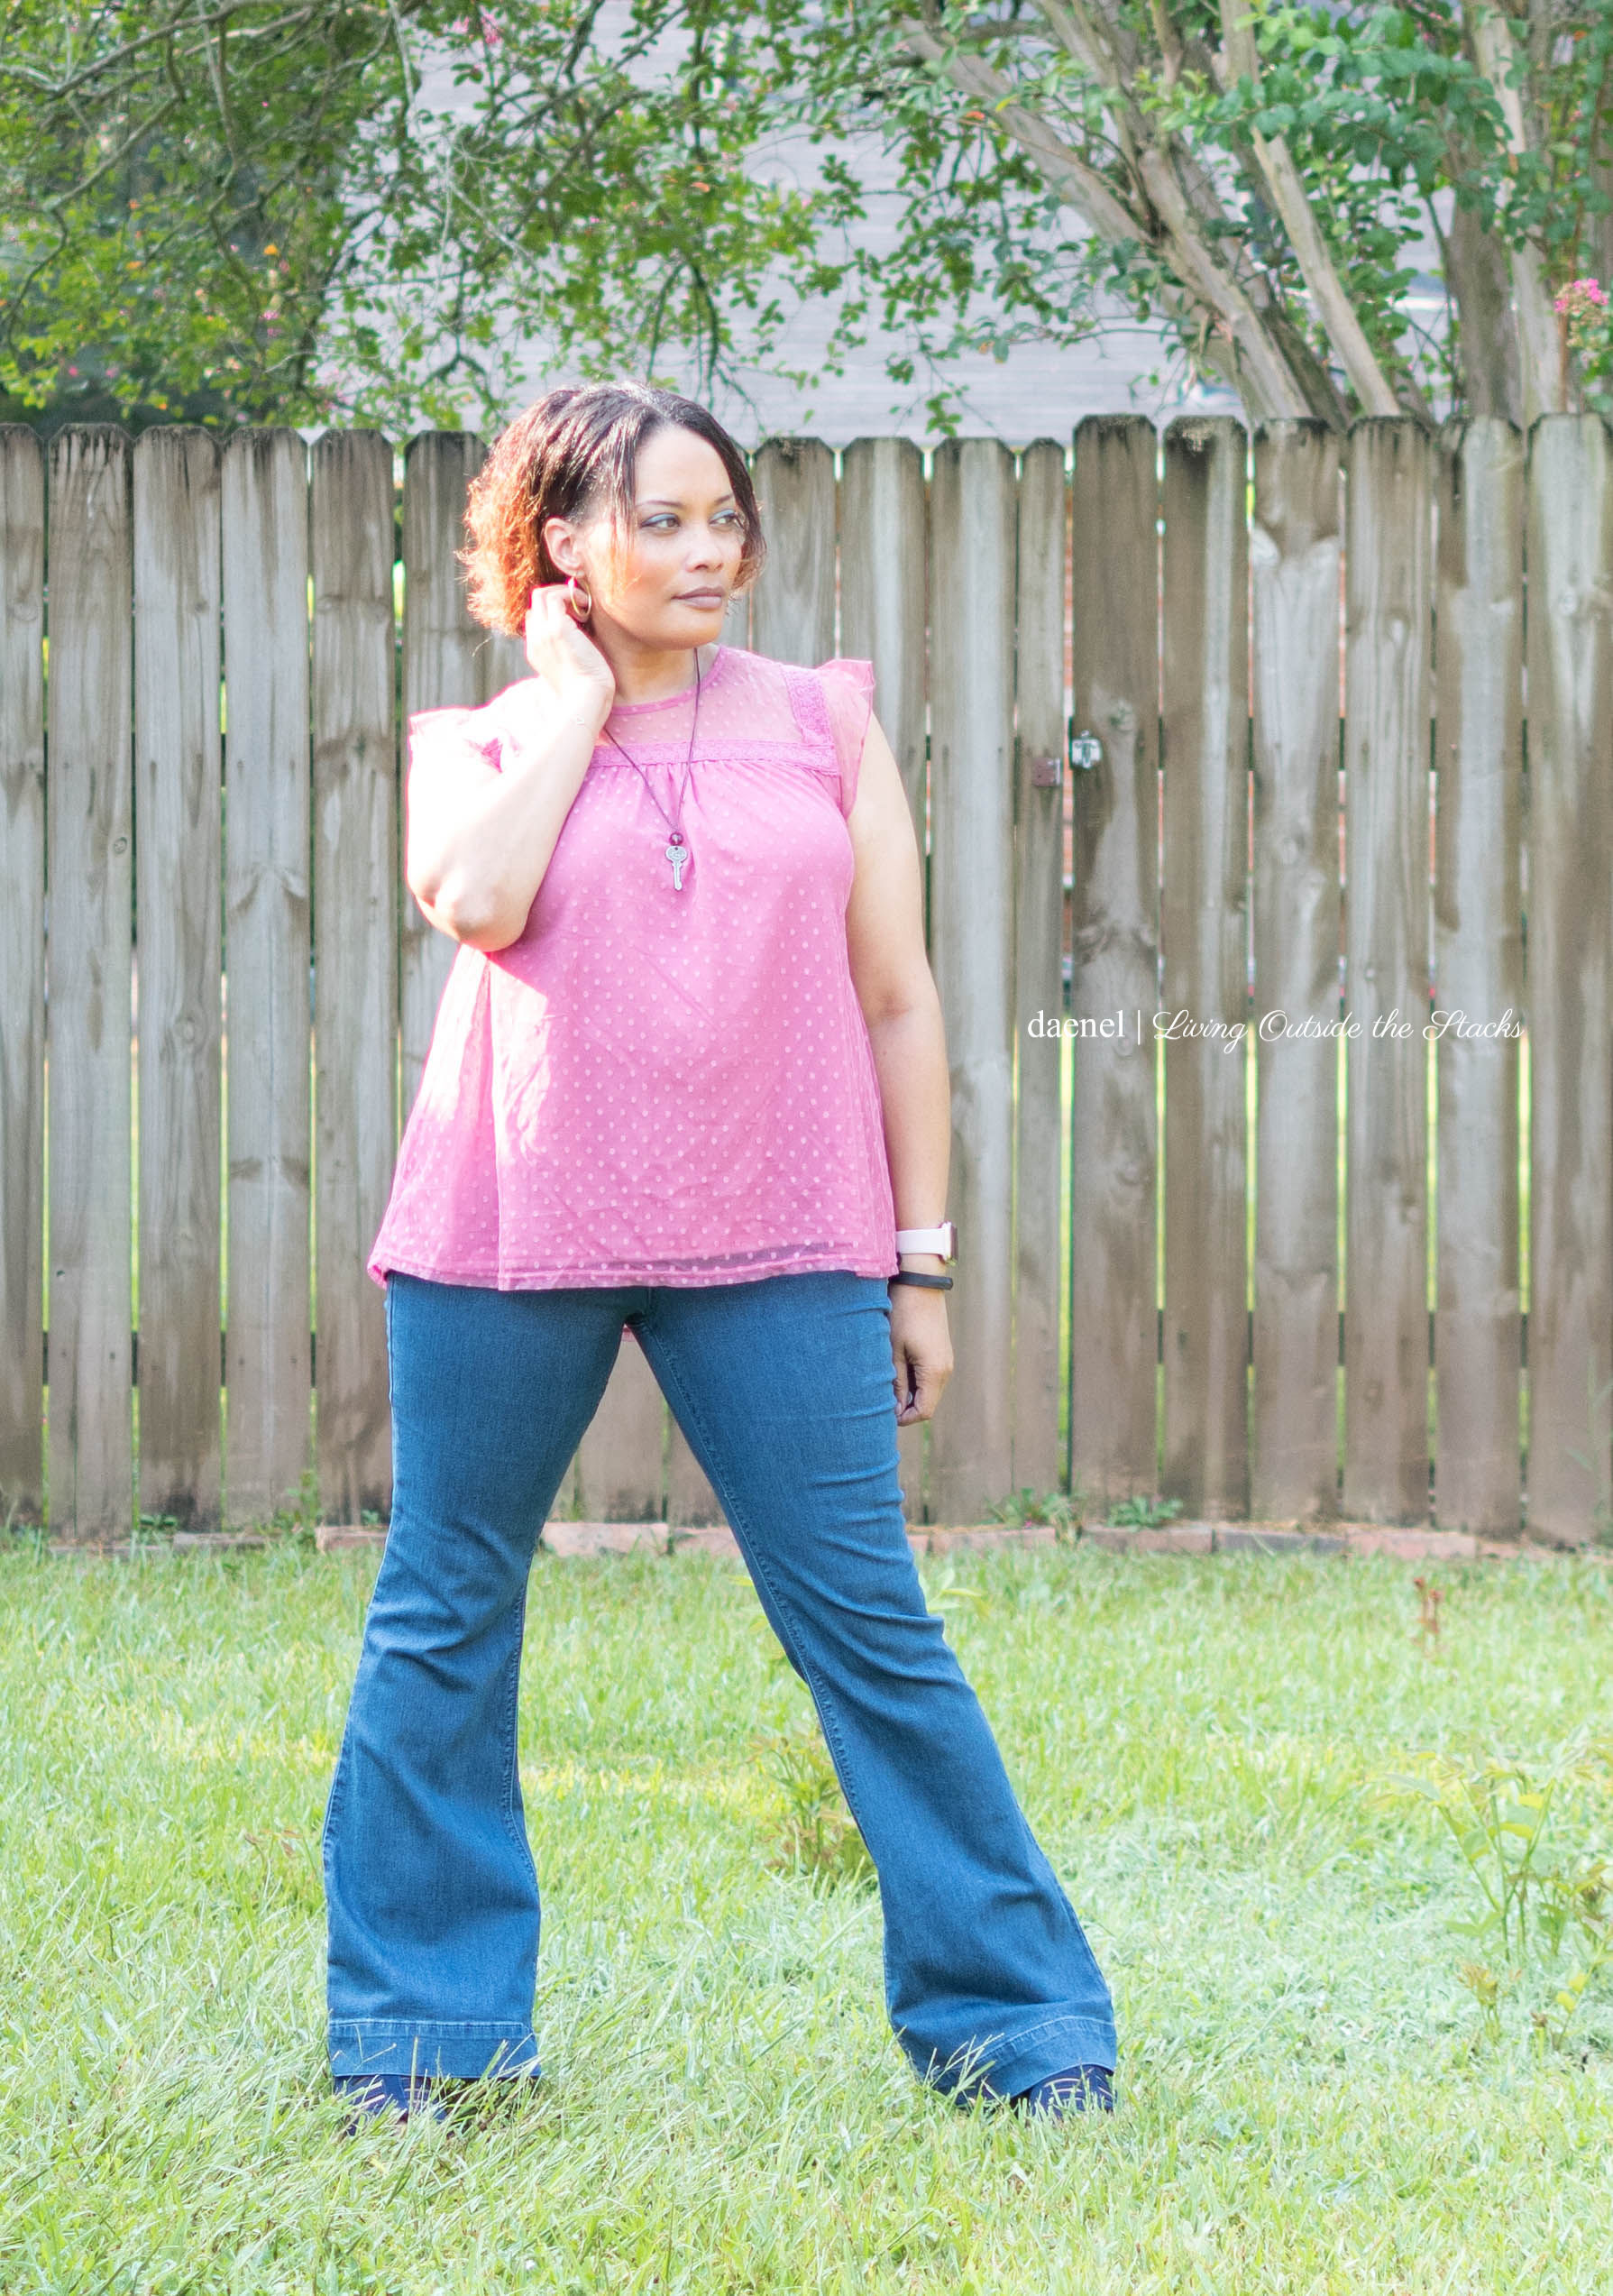  Laurie Felt Flare Leg Jeans and Mauve Baby Doll Top with Skechers Shoes {living outside the stacks} #NiceJeans